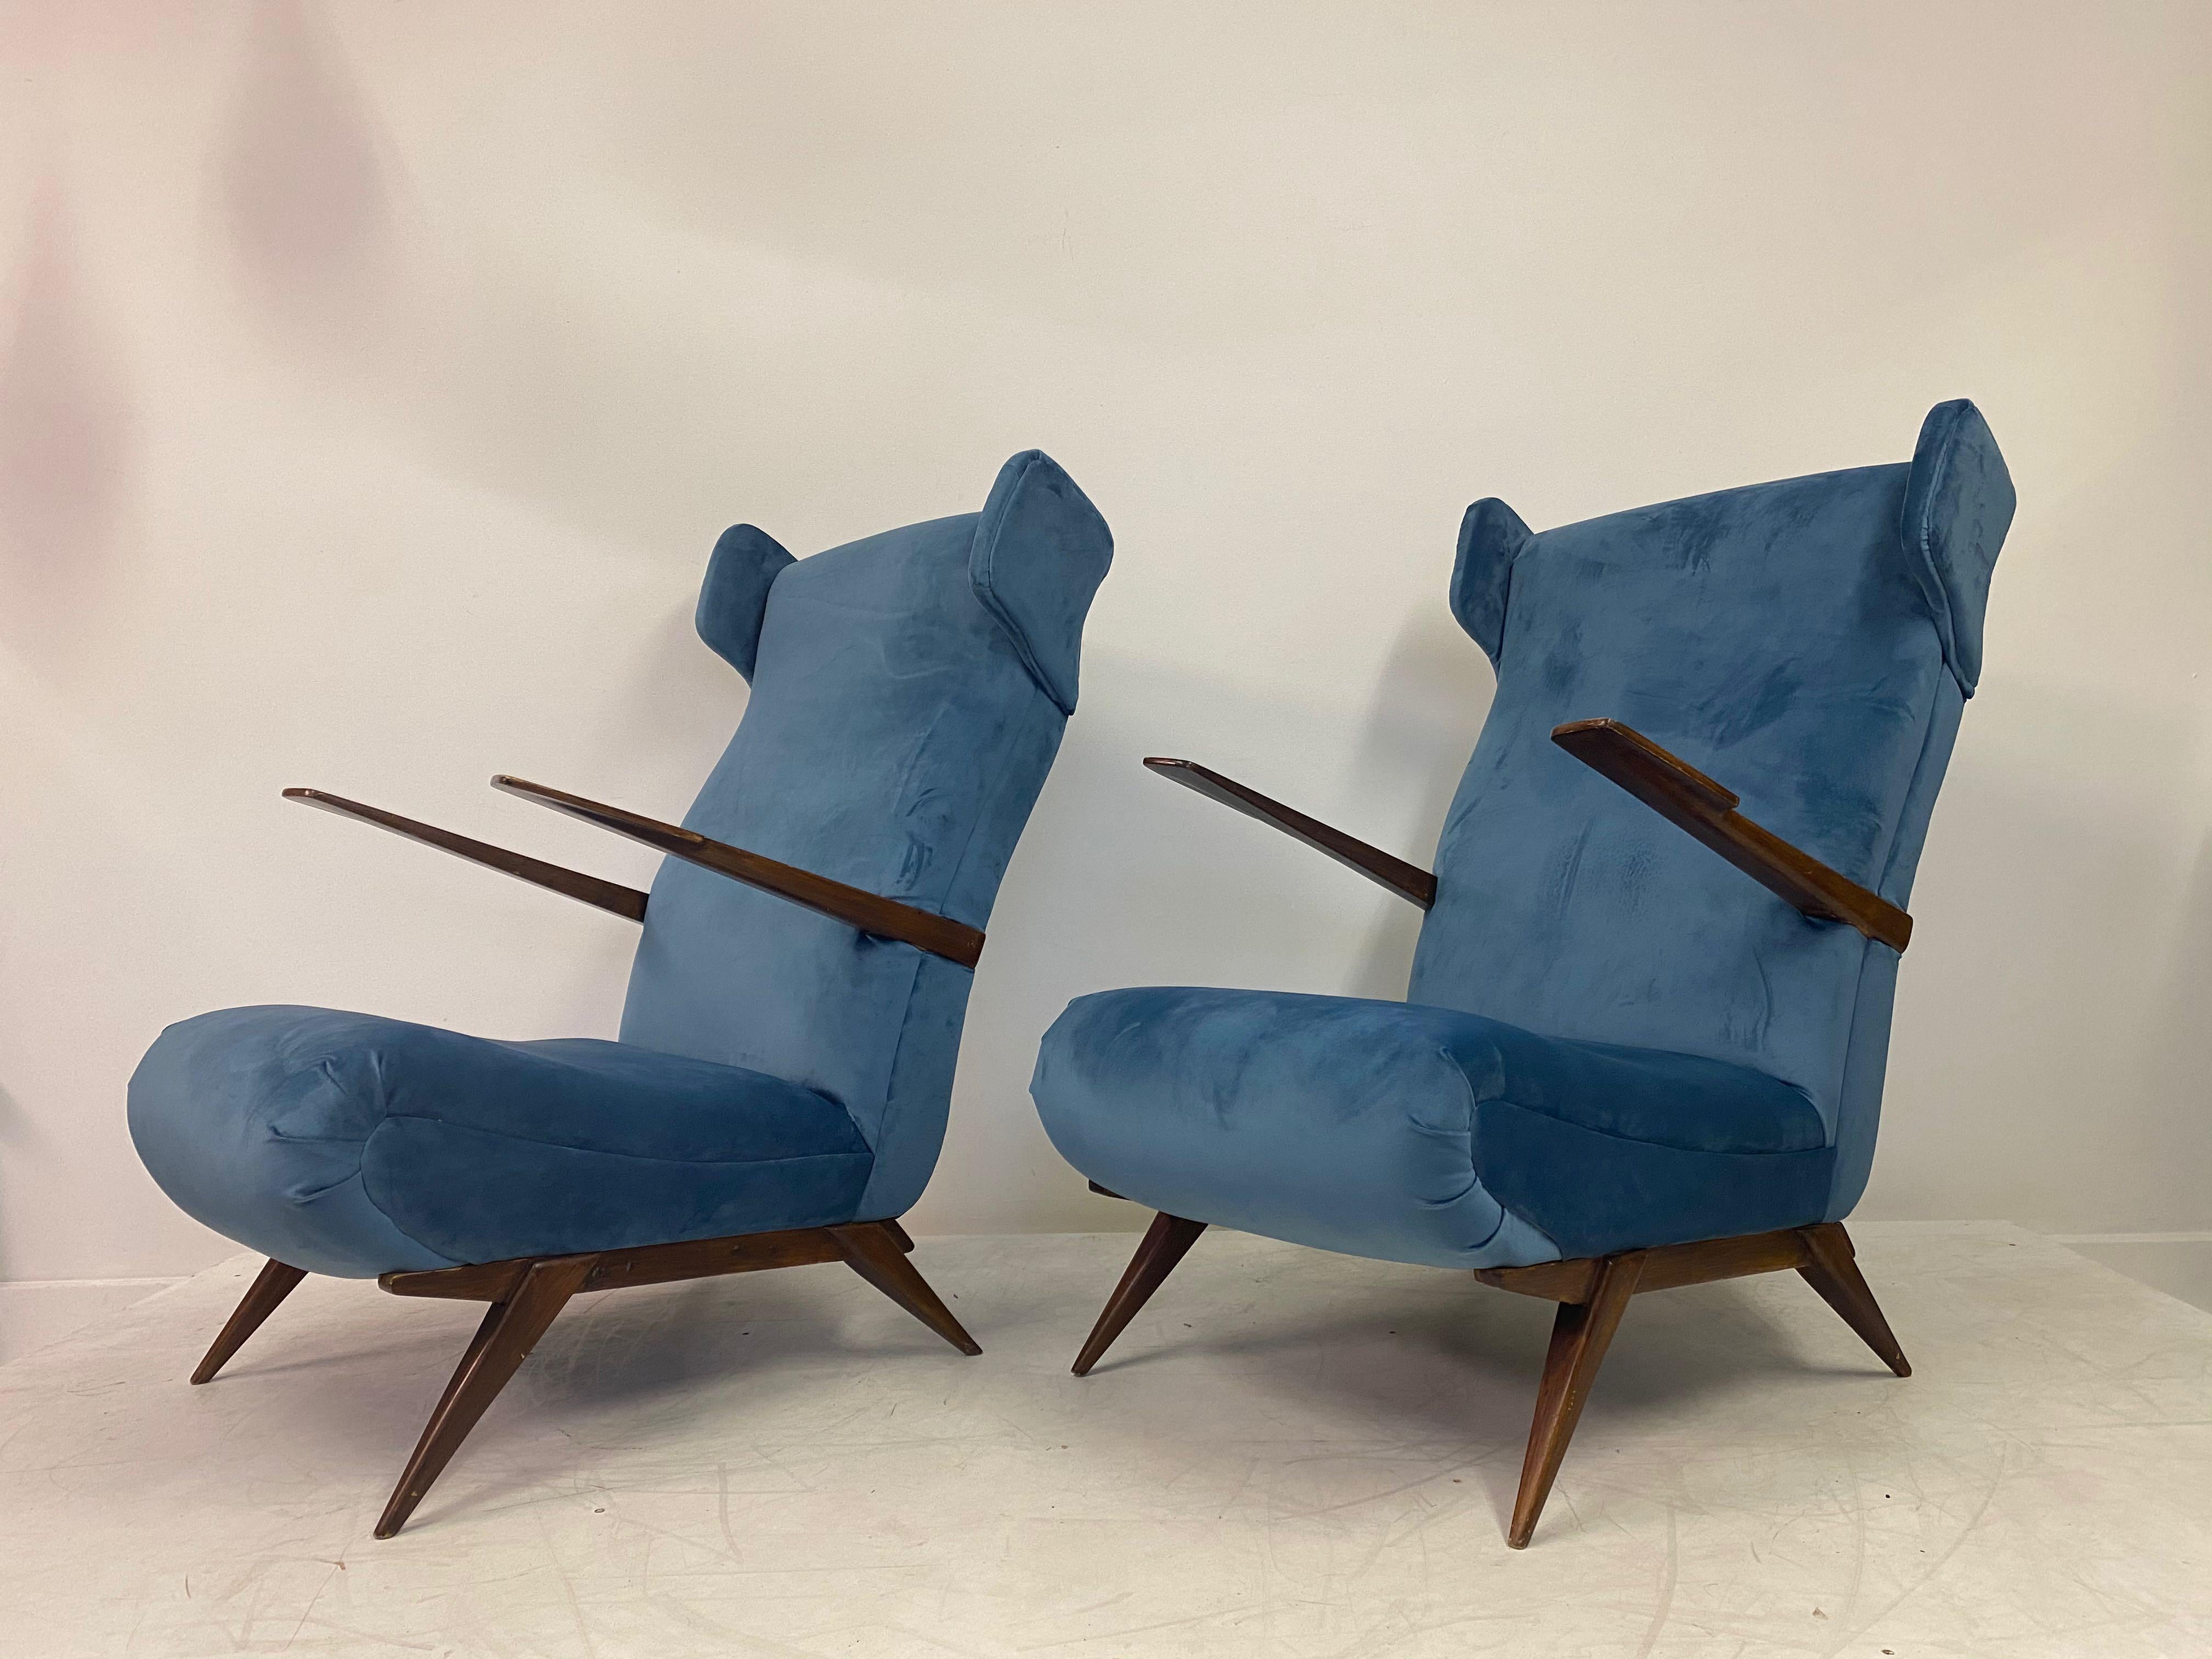 Pair of armchairs

Unusual shape

High back with wings

New blue velvet upholstery

1950s Italian

Measure: Seat height 41cm.